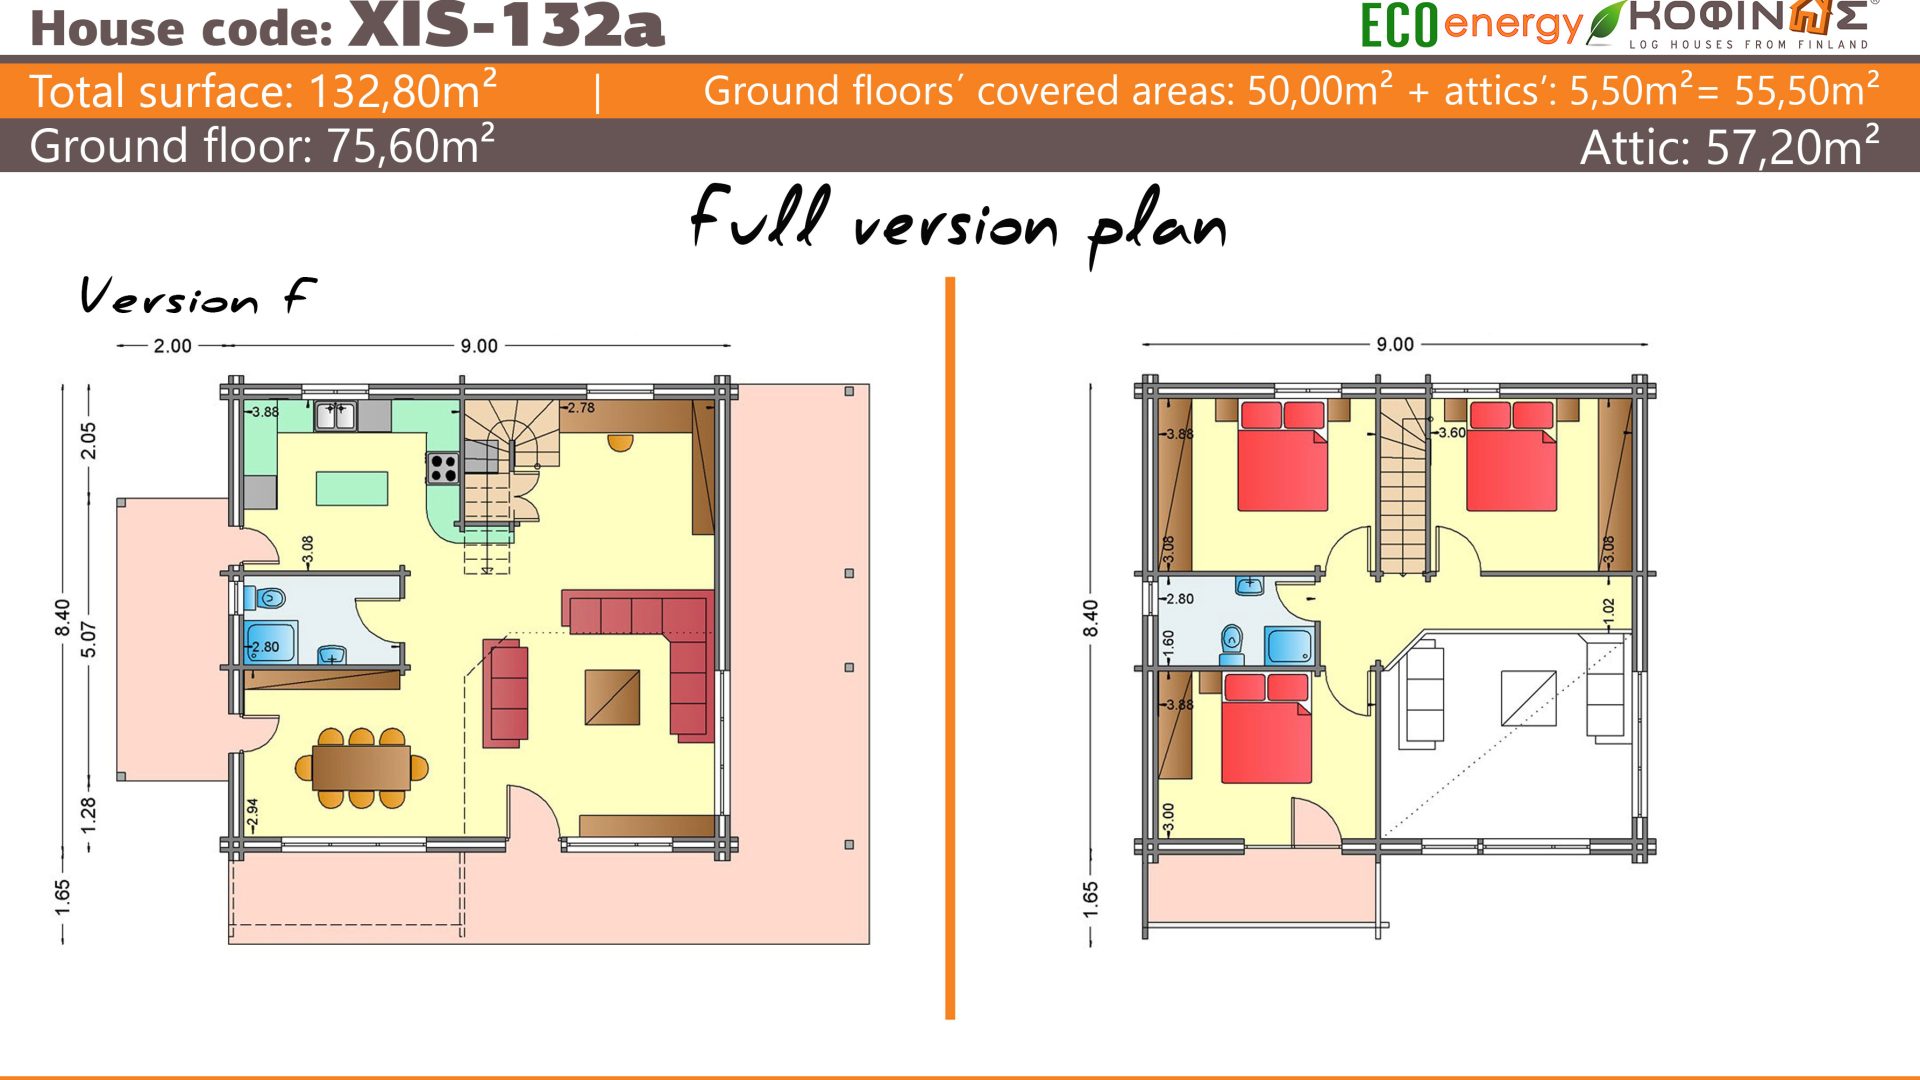 1-story with attic log house XIS-132a, total surface of 132,80 m²